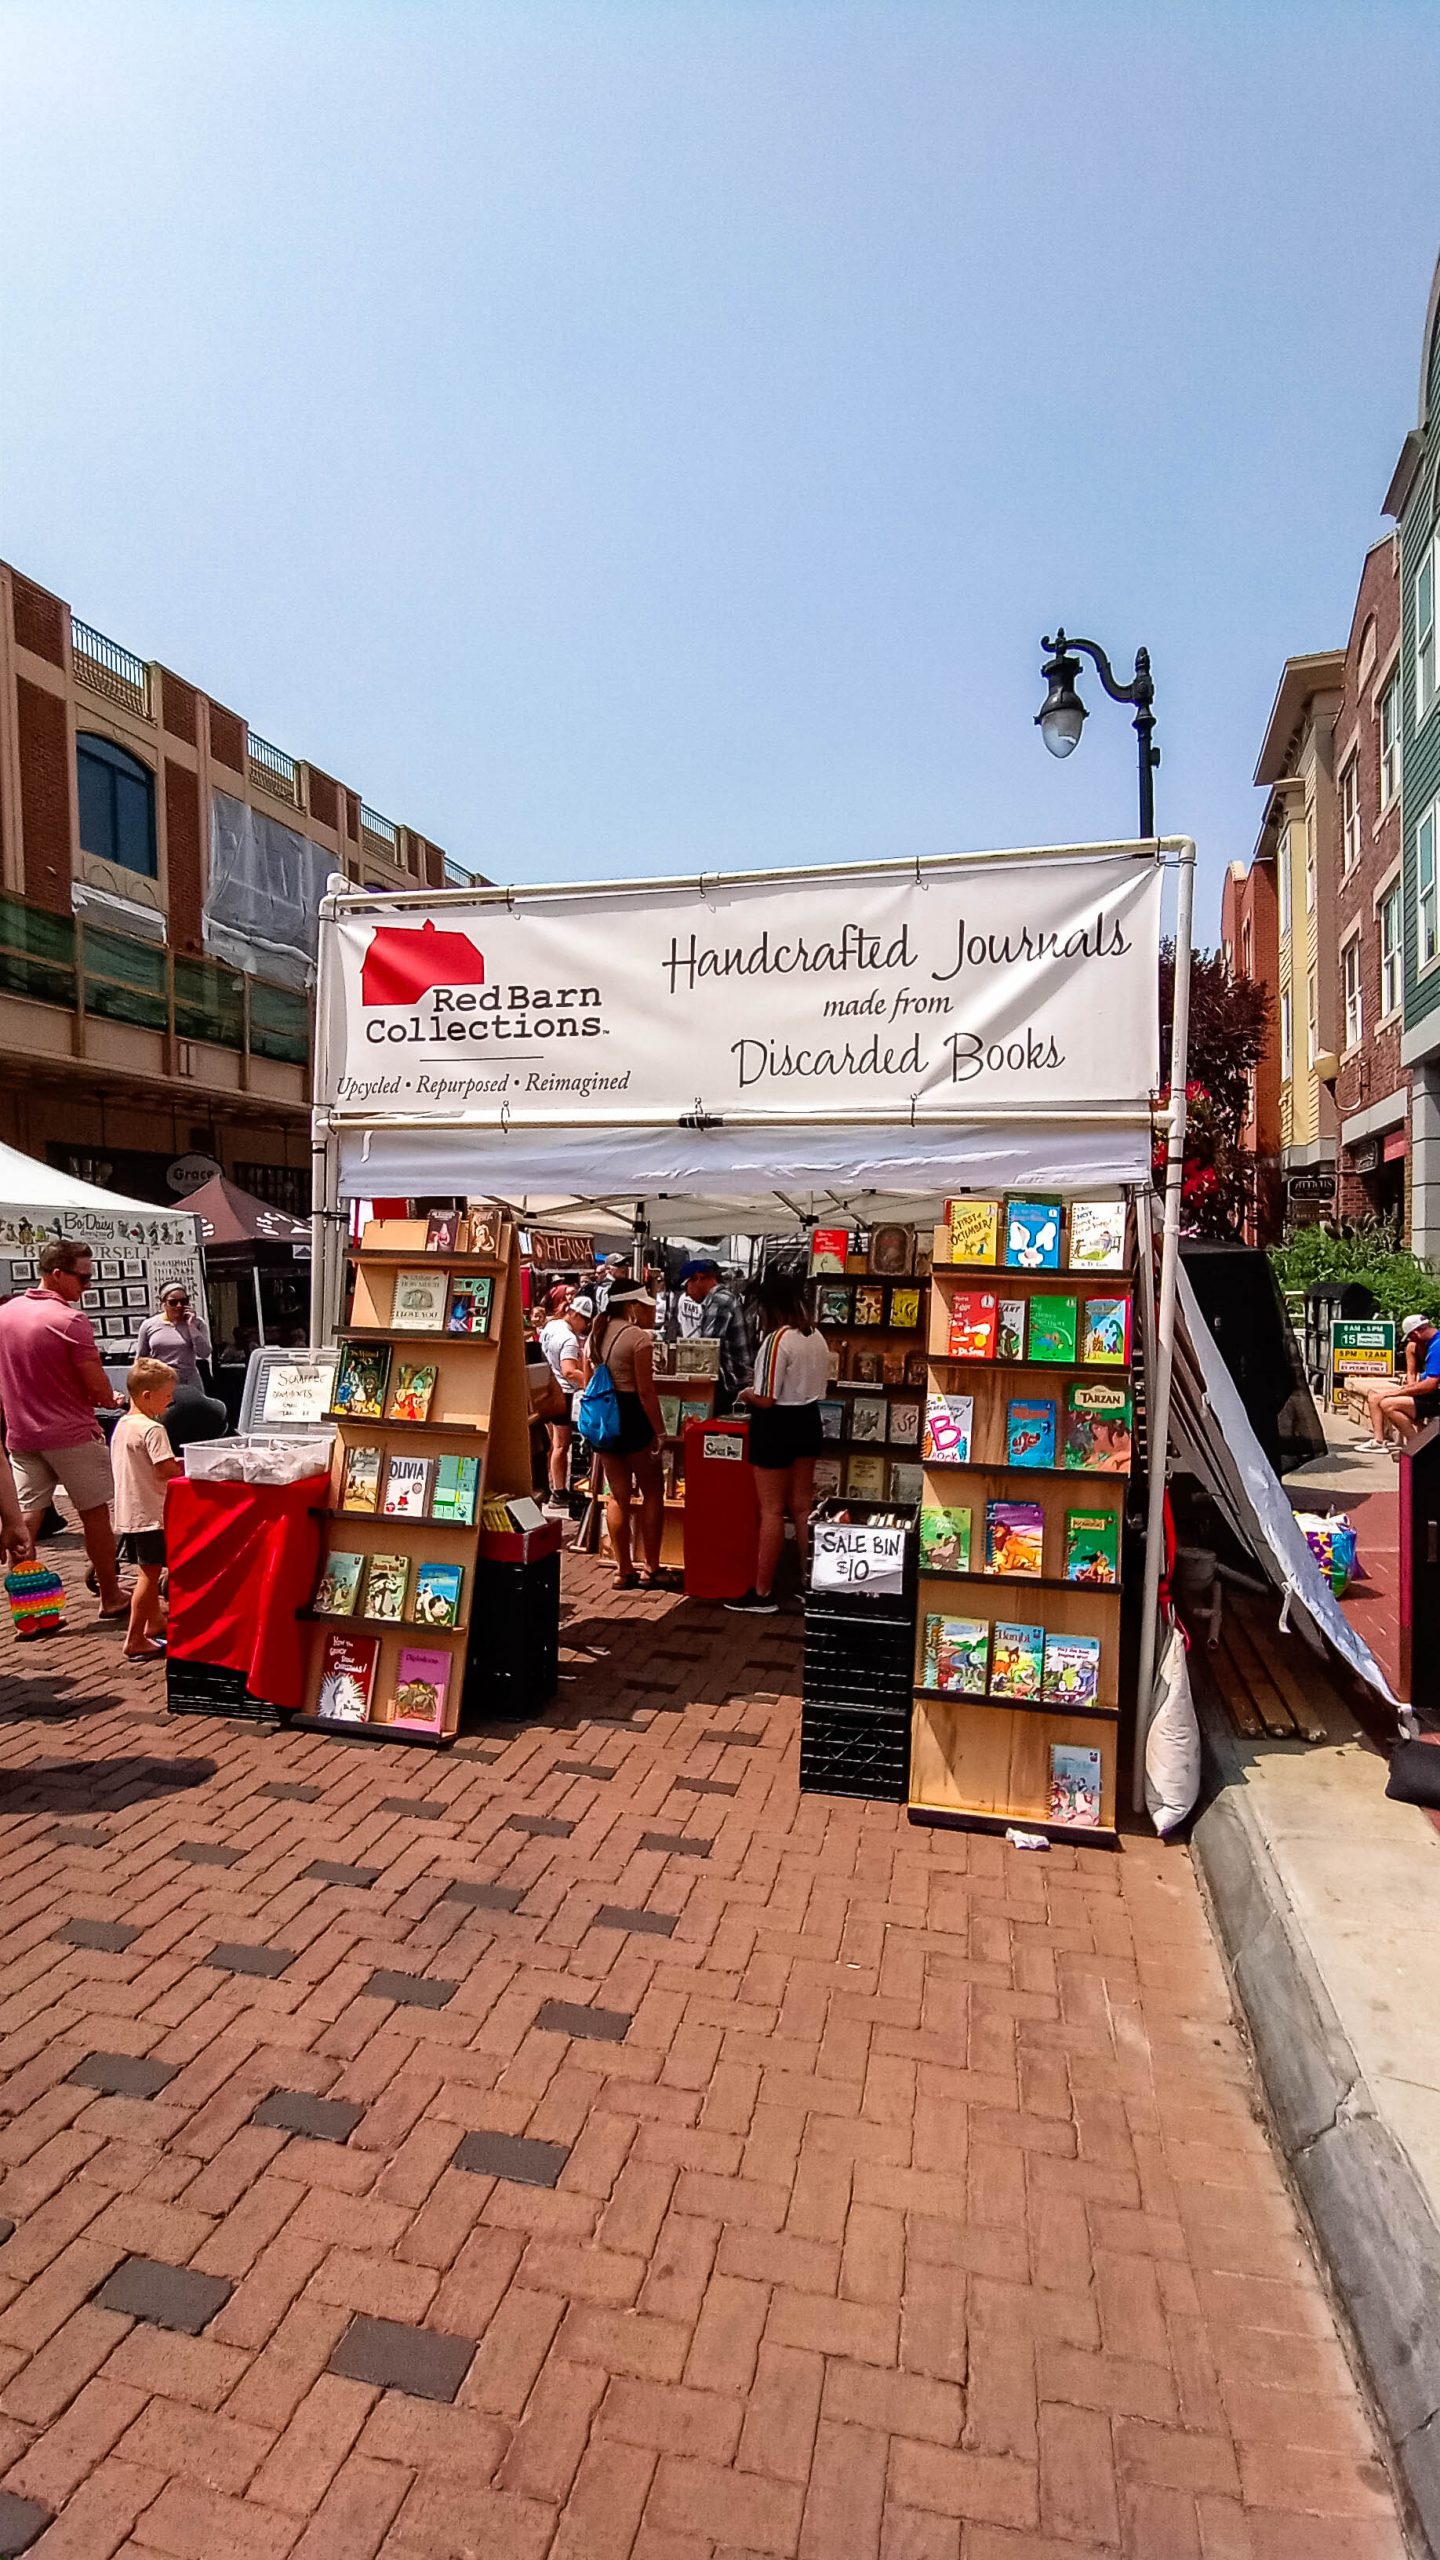 Handcrafted journals, books, and other goods on display.